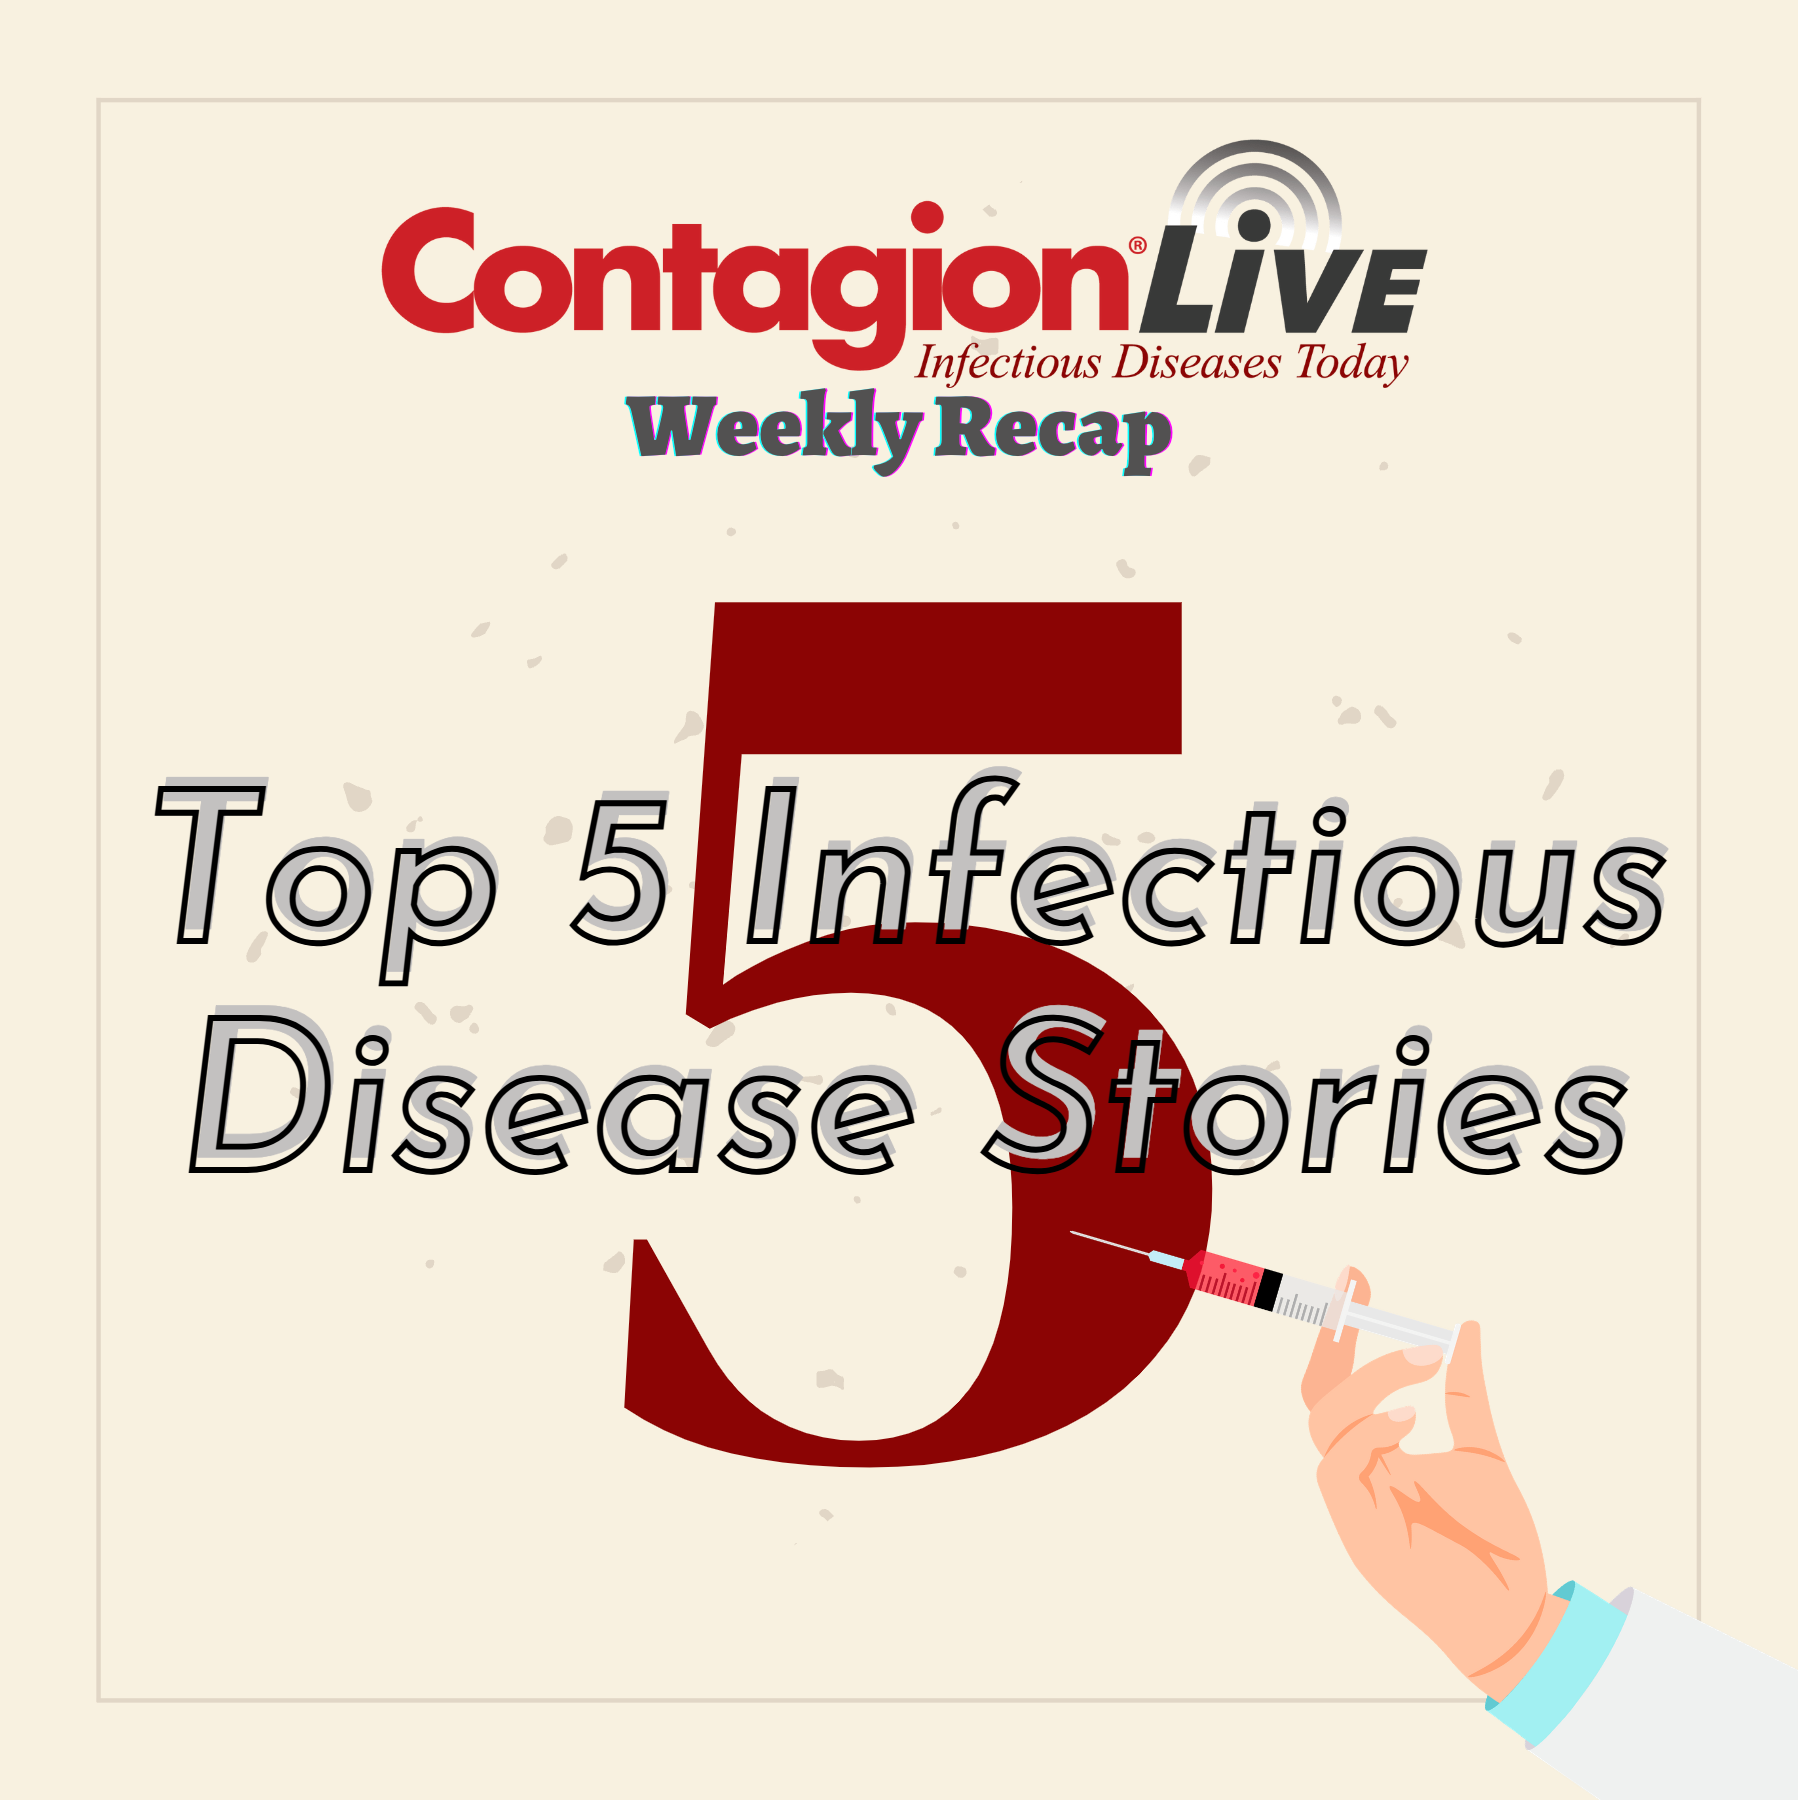 The Most-Read Infectious Disease Stories This Week